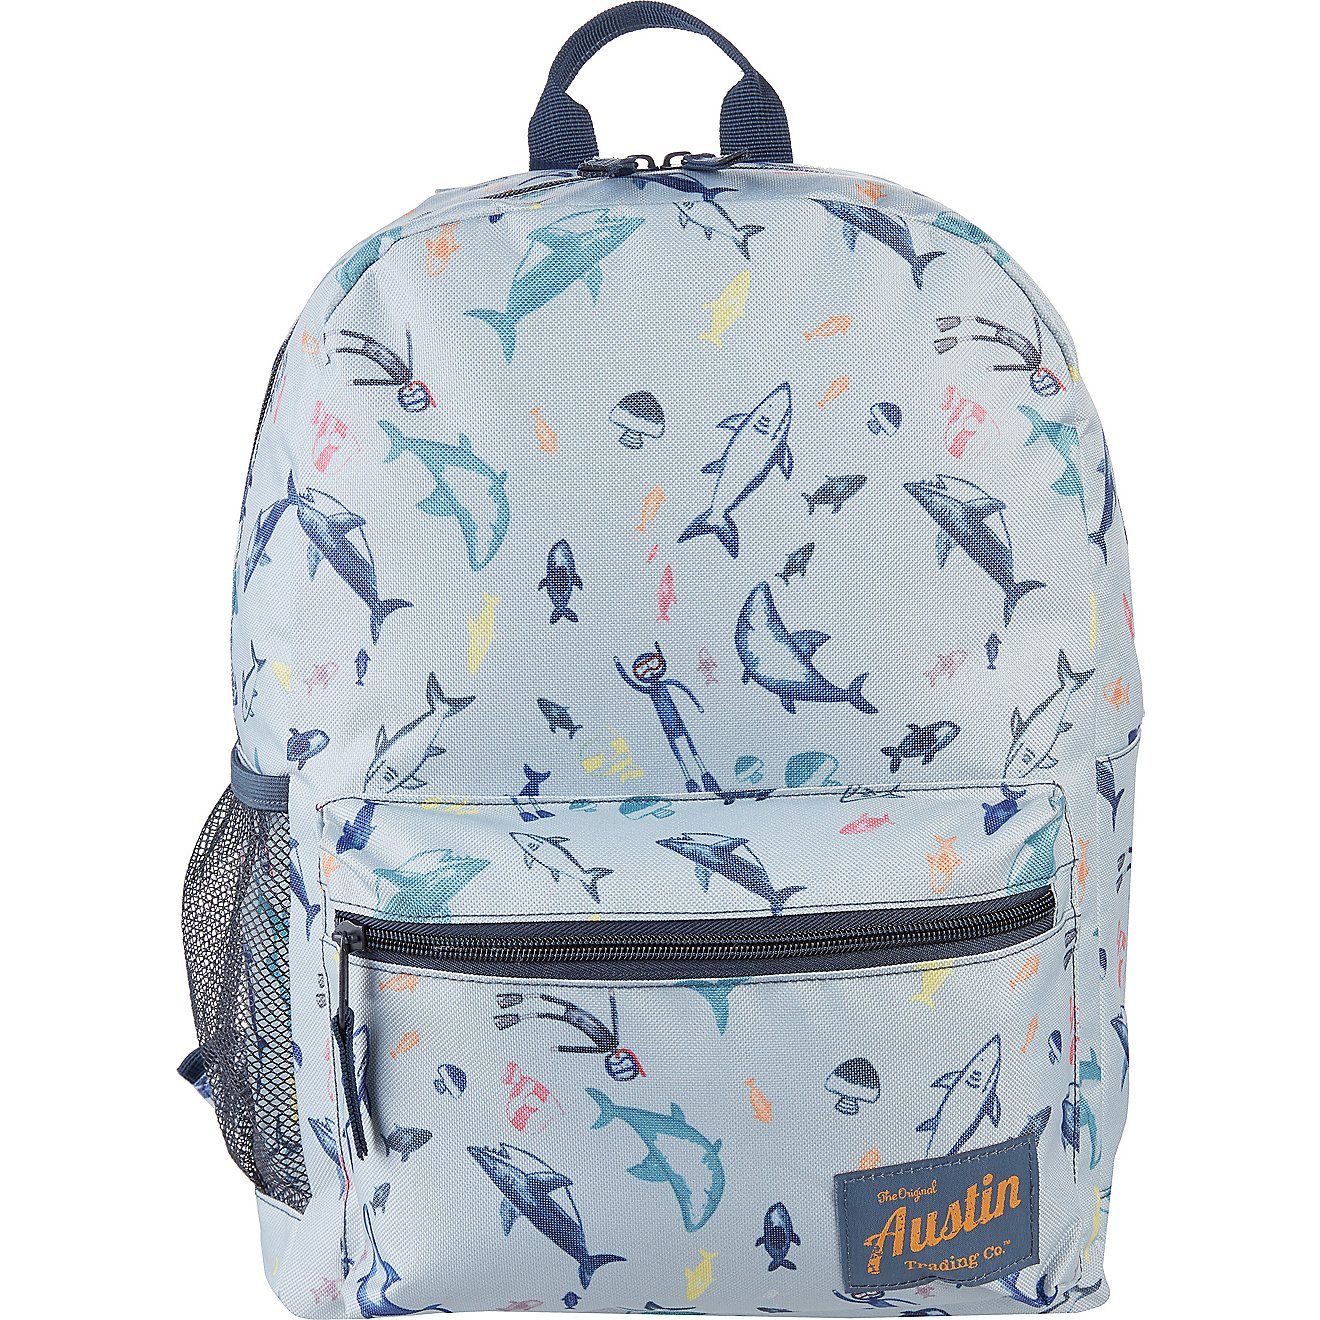 Austin Outdoors Kids Critter Backpack | Academy Sports + Outdoor Affiliate